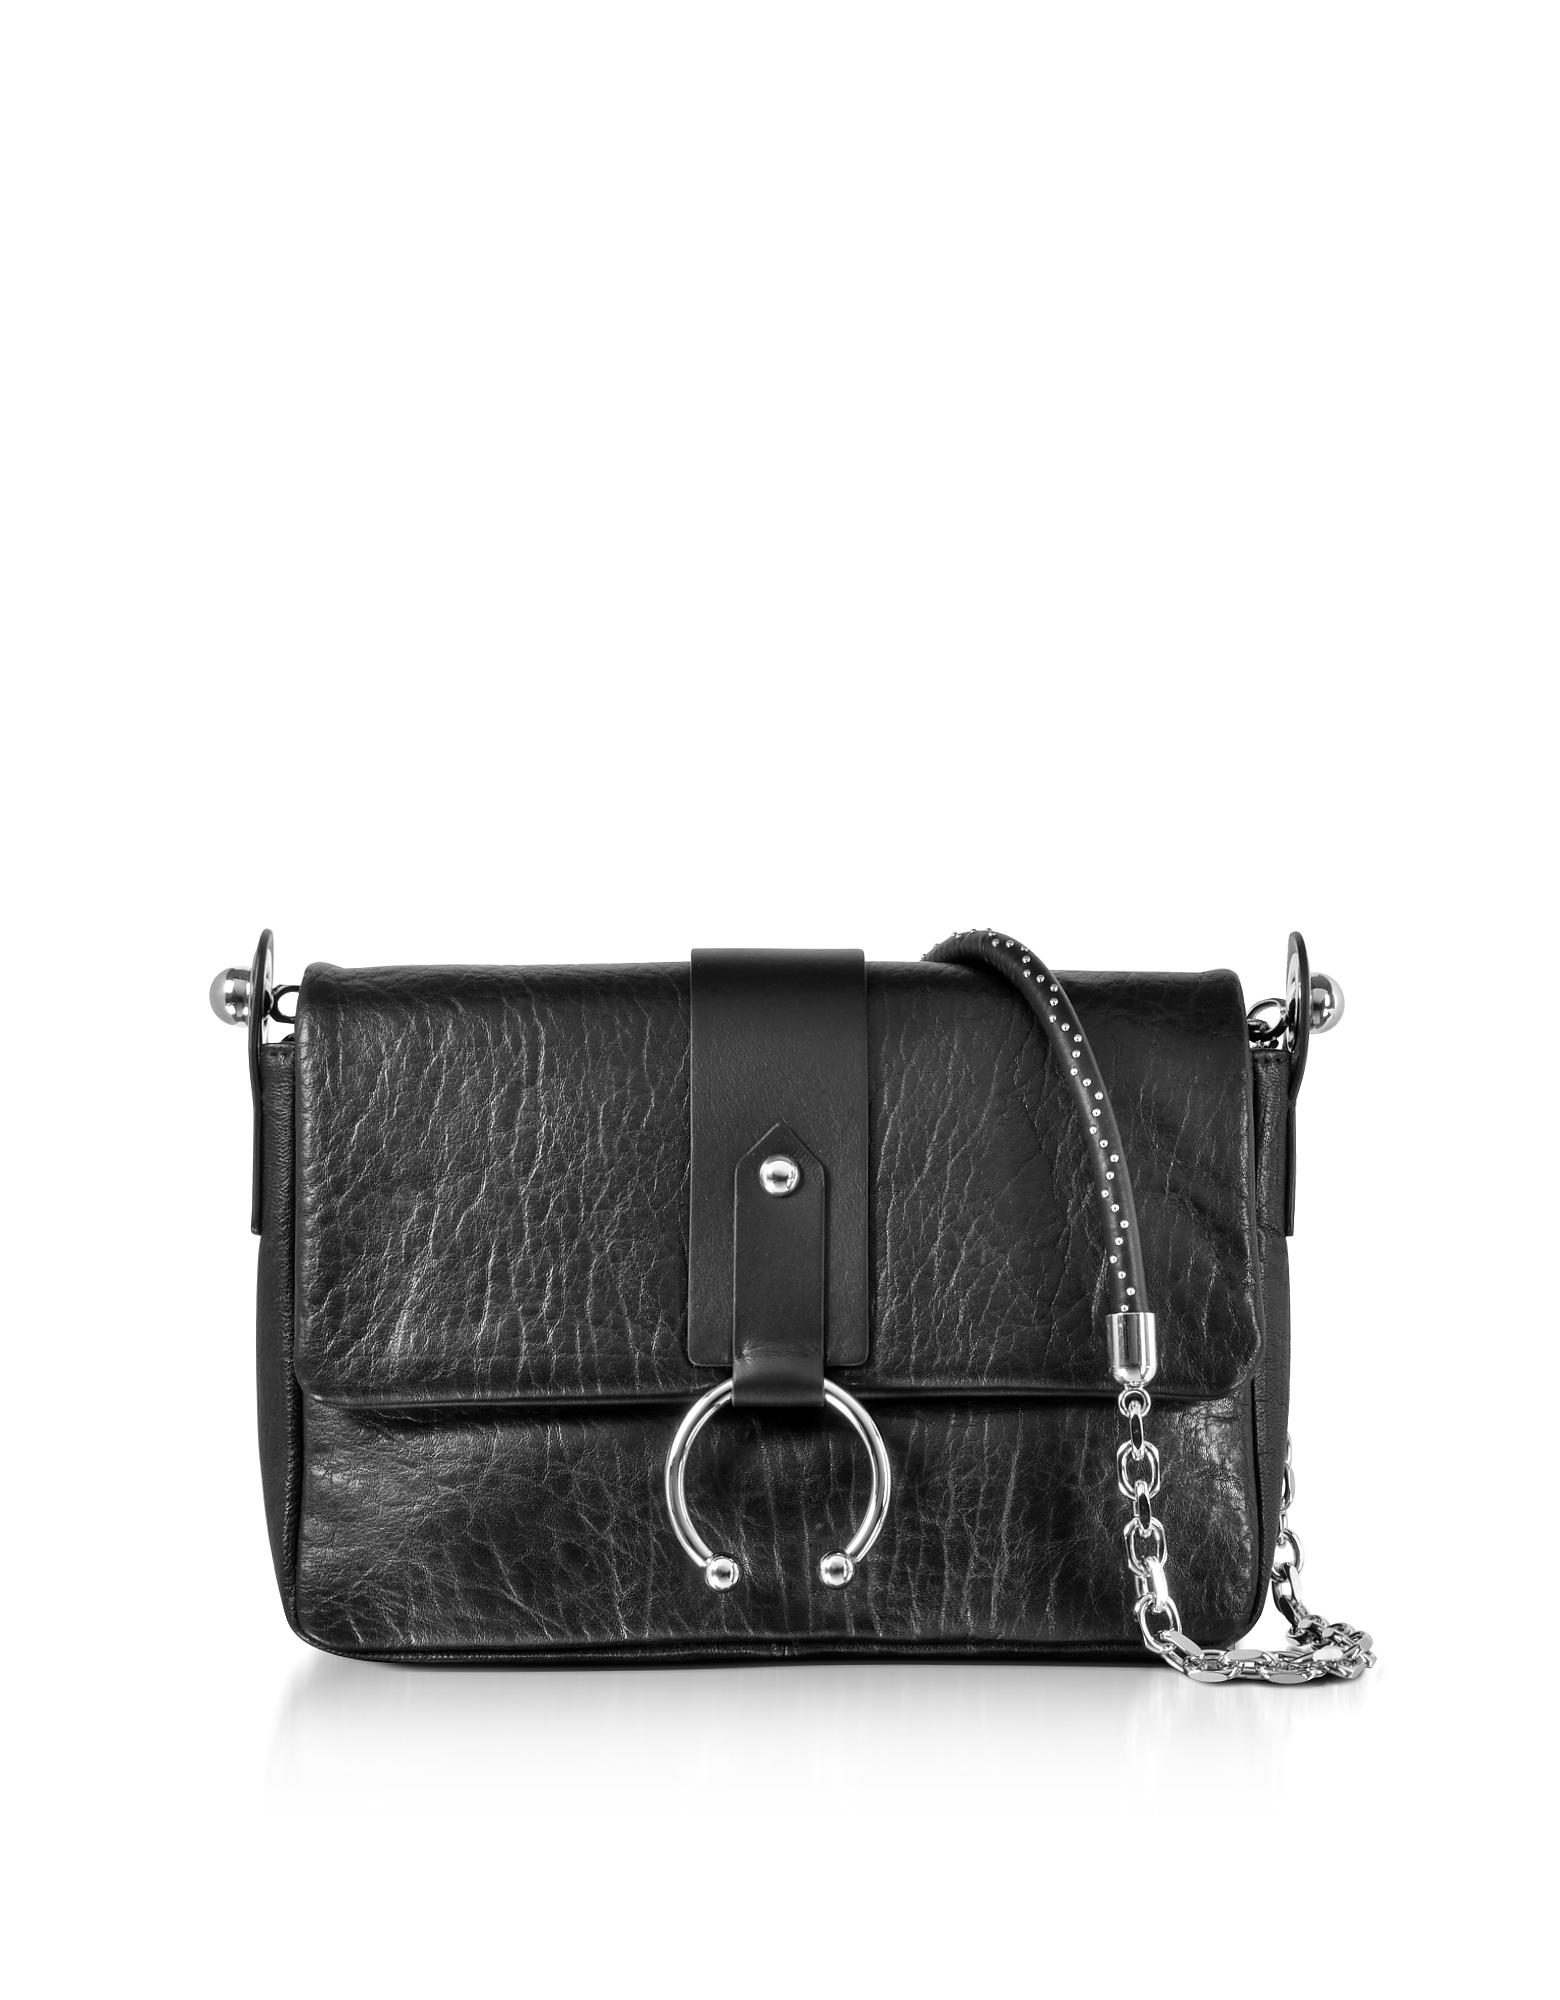 RED Valentino - Black Hammered Leather Shoulder Bag | ABOUT ICONS